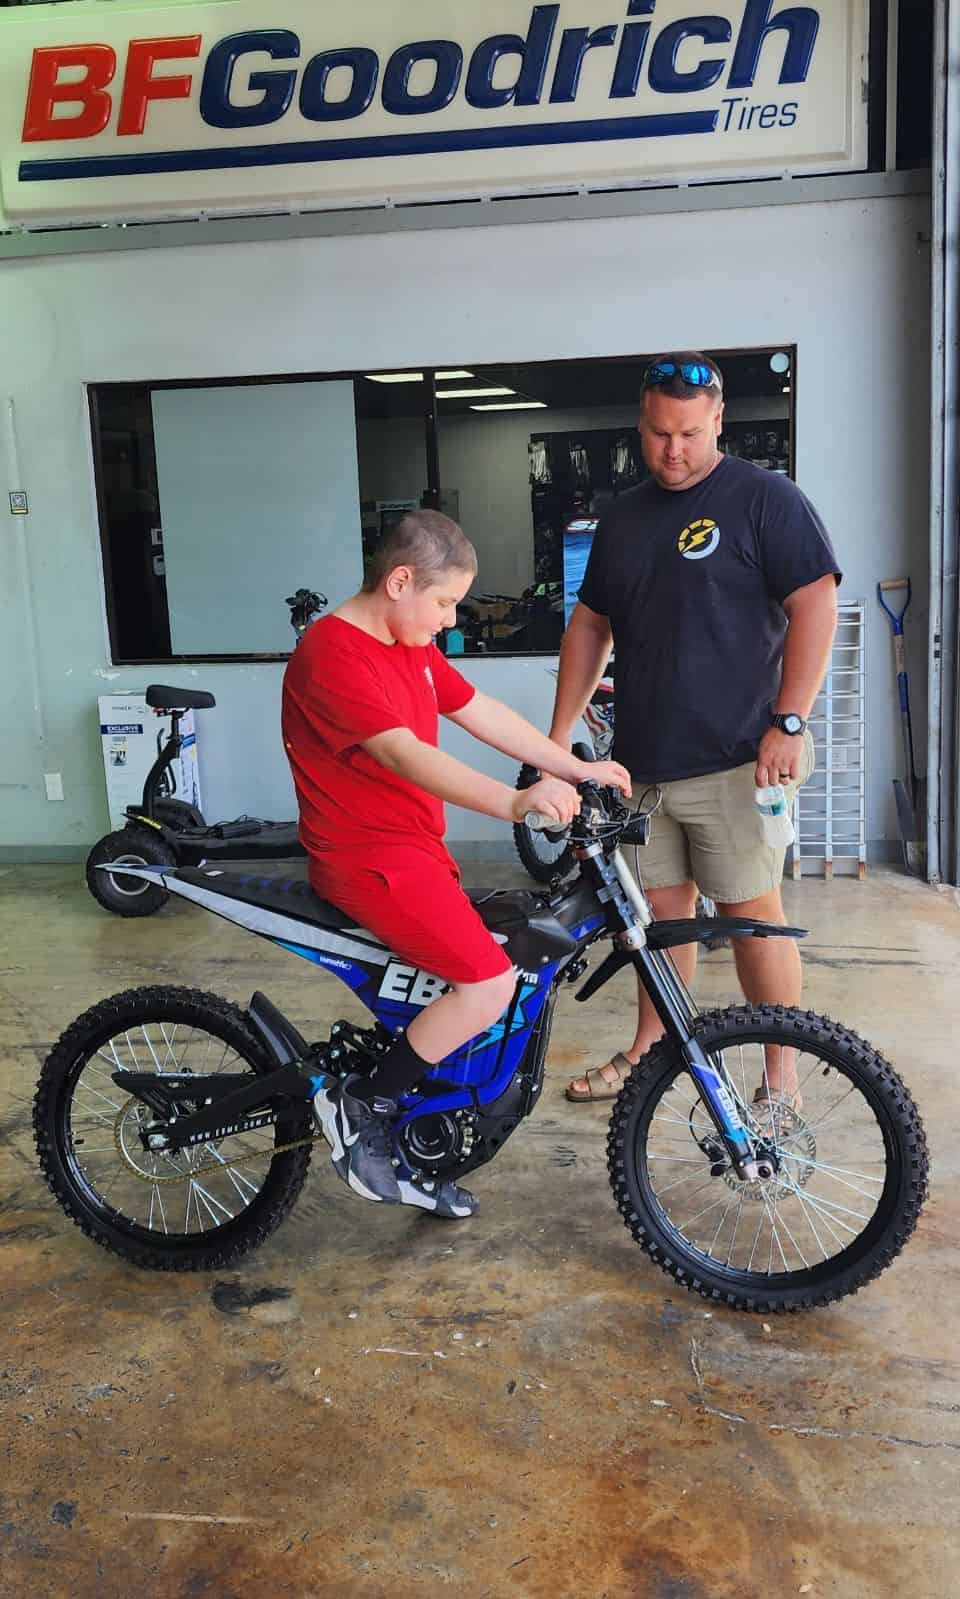 Aaron Nations (right) helps Deegan Giglio feel comfortable on his new electric motorbike. [Photo by Austyn Szempruch]